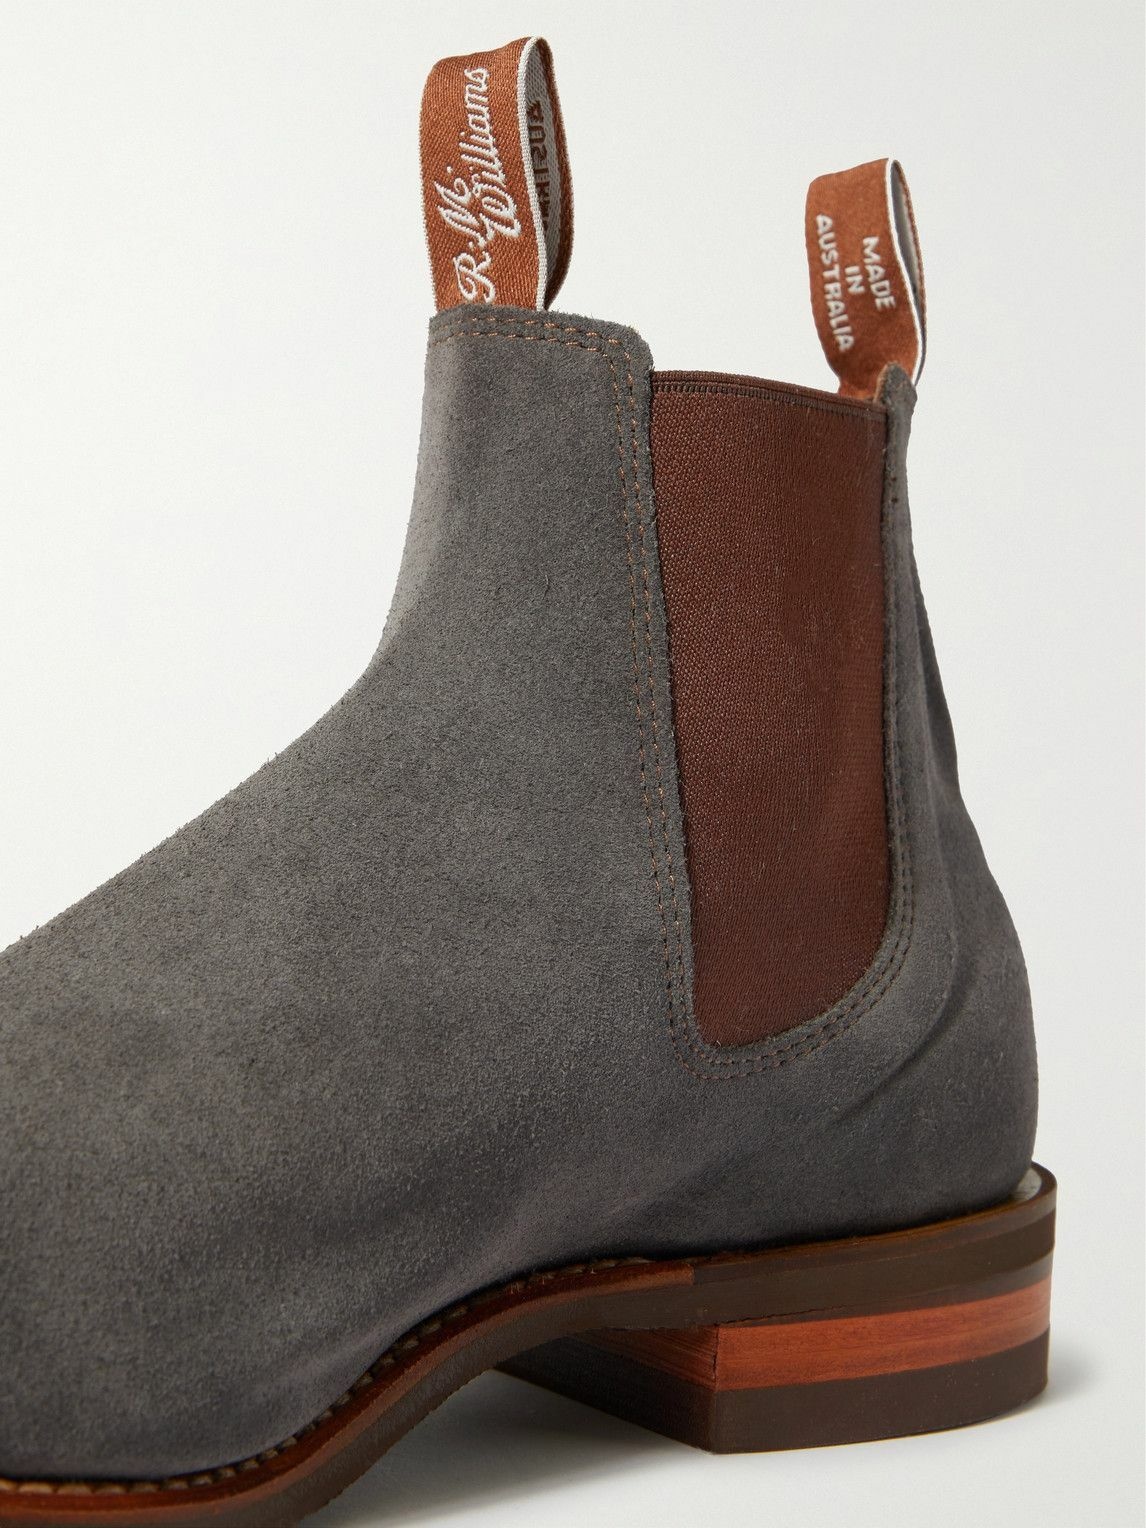 Craftsman Leather Chelsea Boots